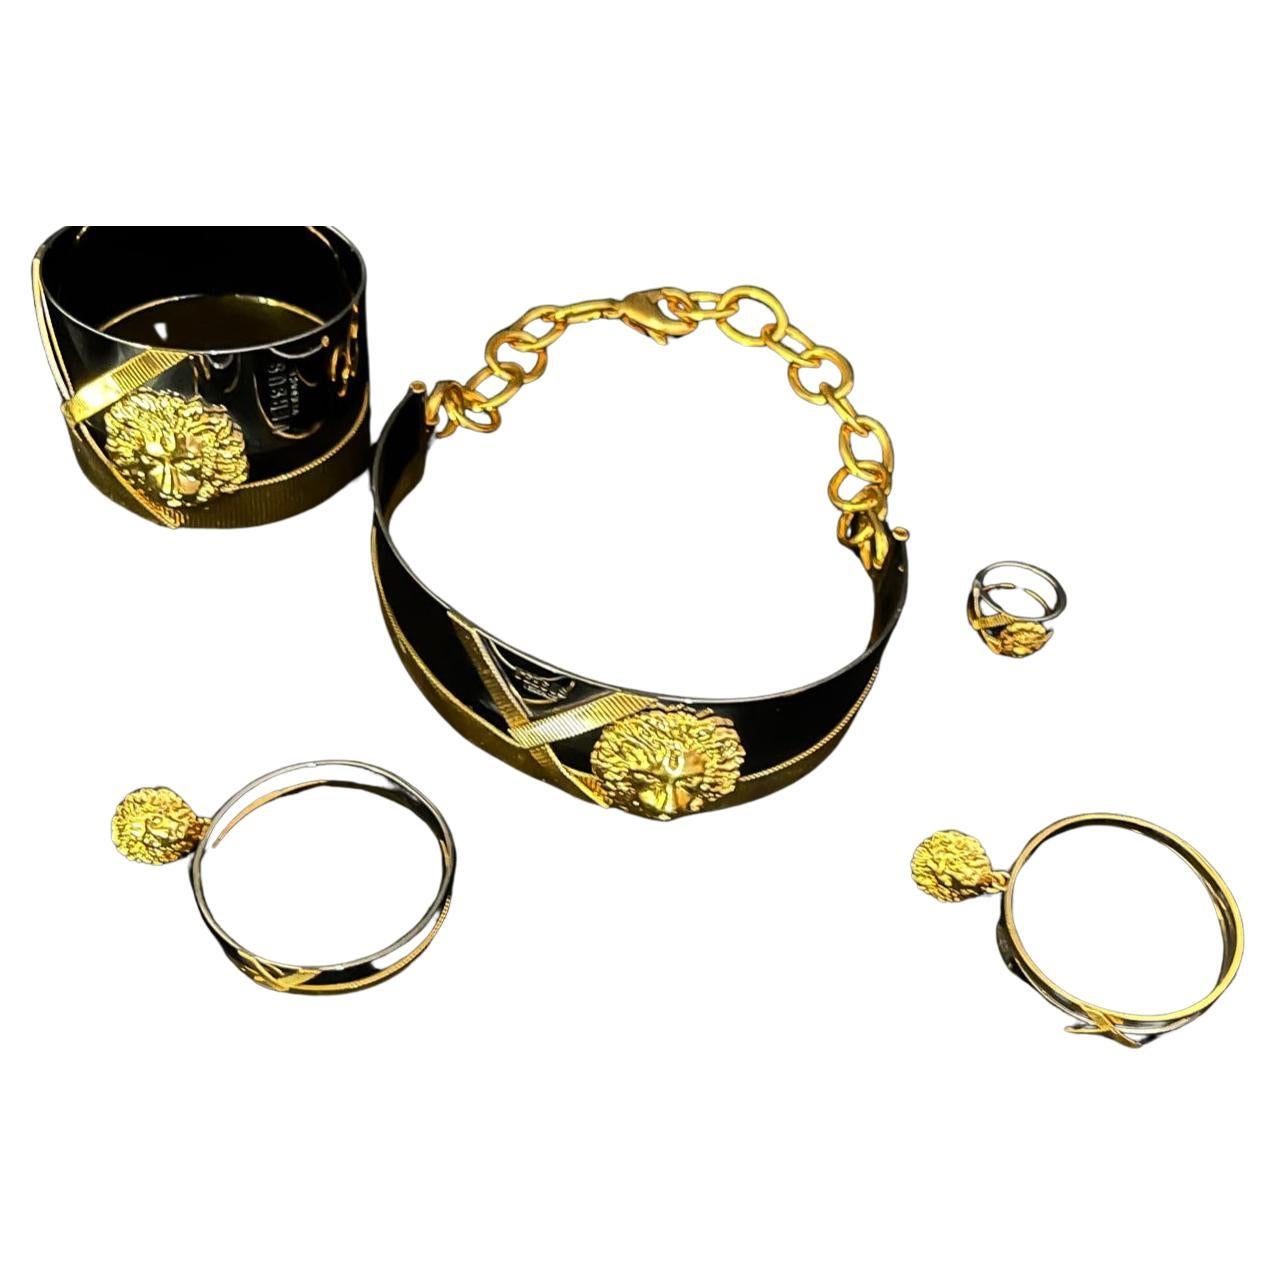 ANTHONY VACCARELLO x VERSUS VERSACE DOUBLE HOOPED LION SET For Sale